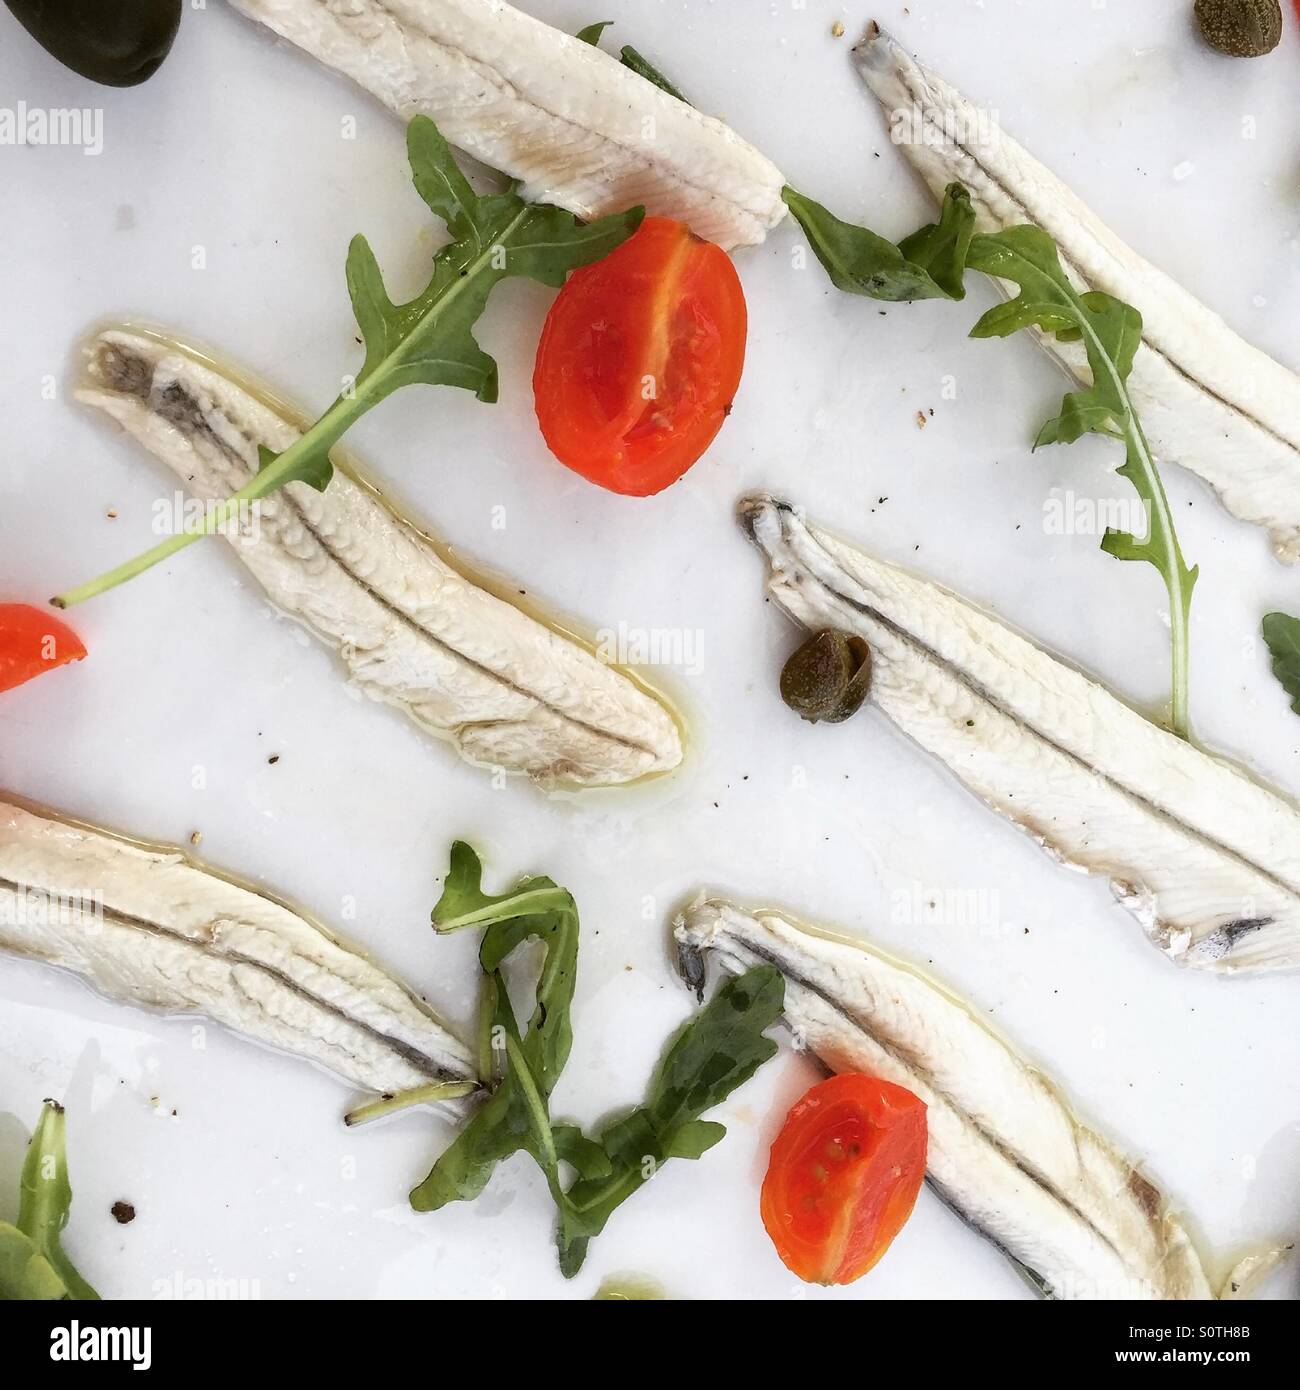 Marinated anchovies fish with tomatoes and capers on plate Stock Photo